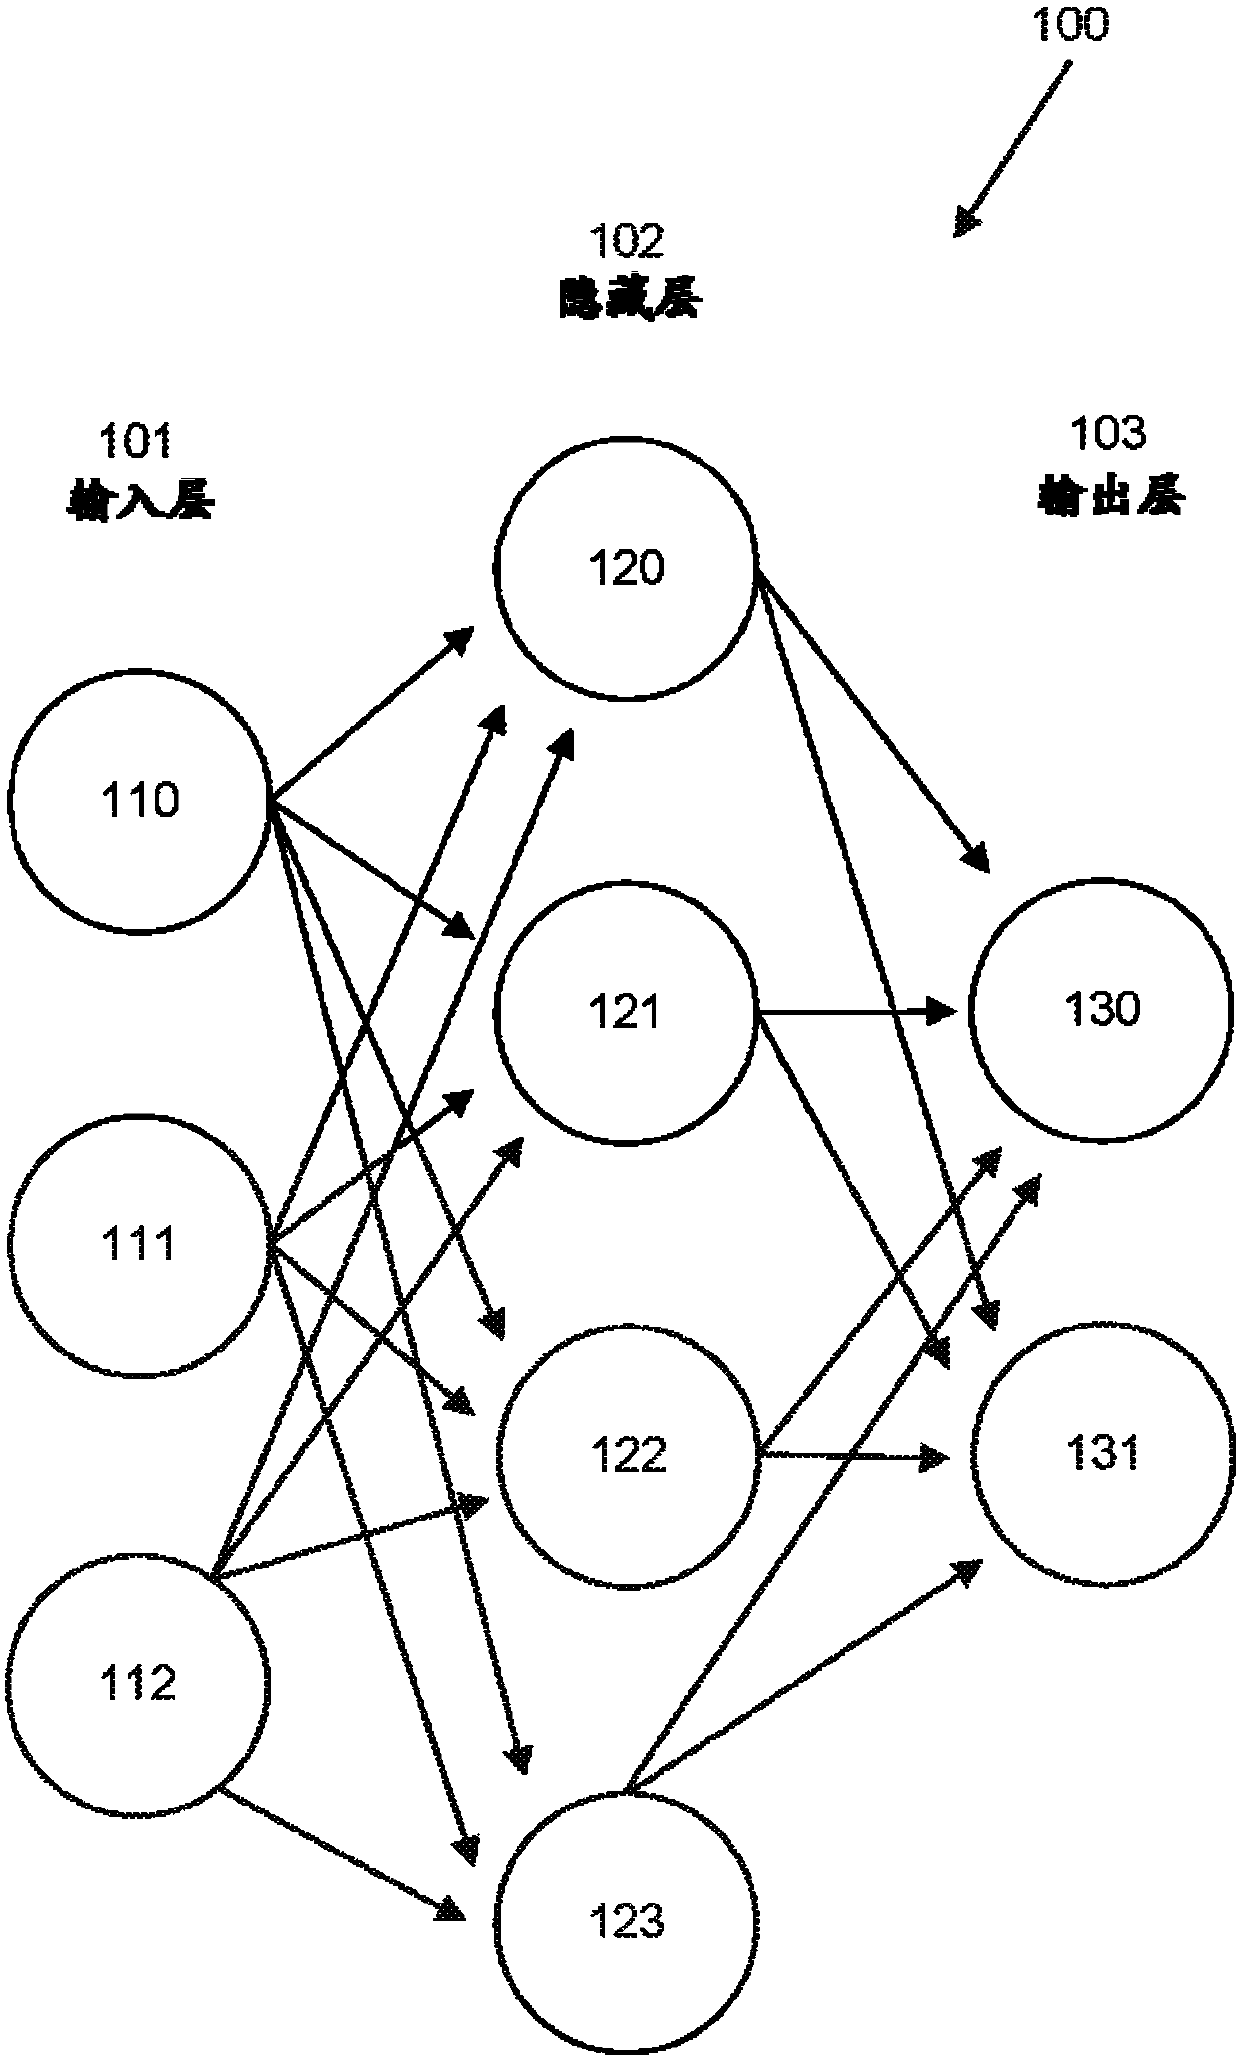 Improved artificial neural network for language modelling and prediction